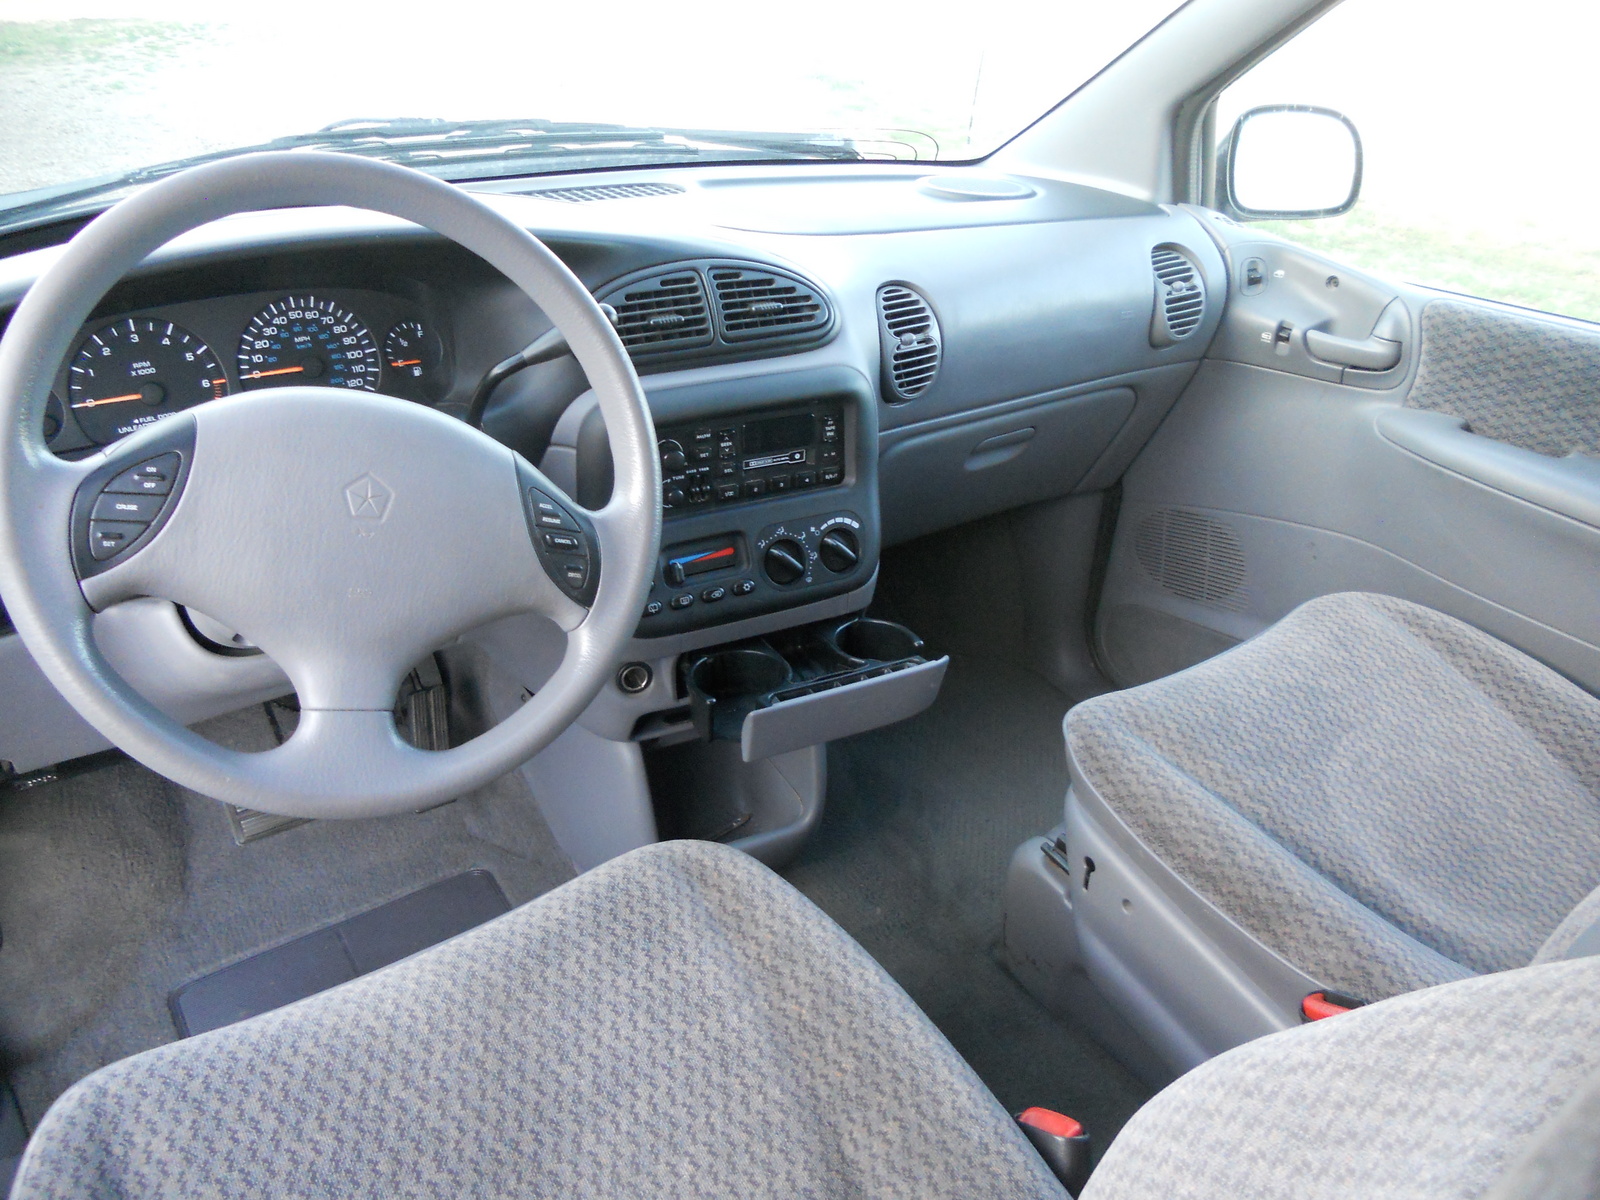 1999 PLYMOUTH VOYAGER - Image #11